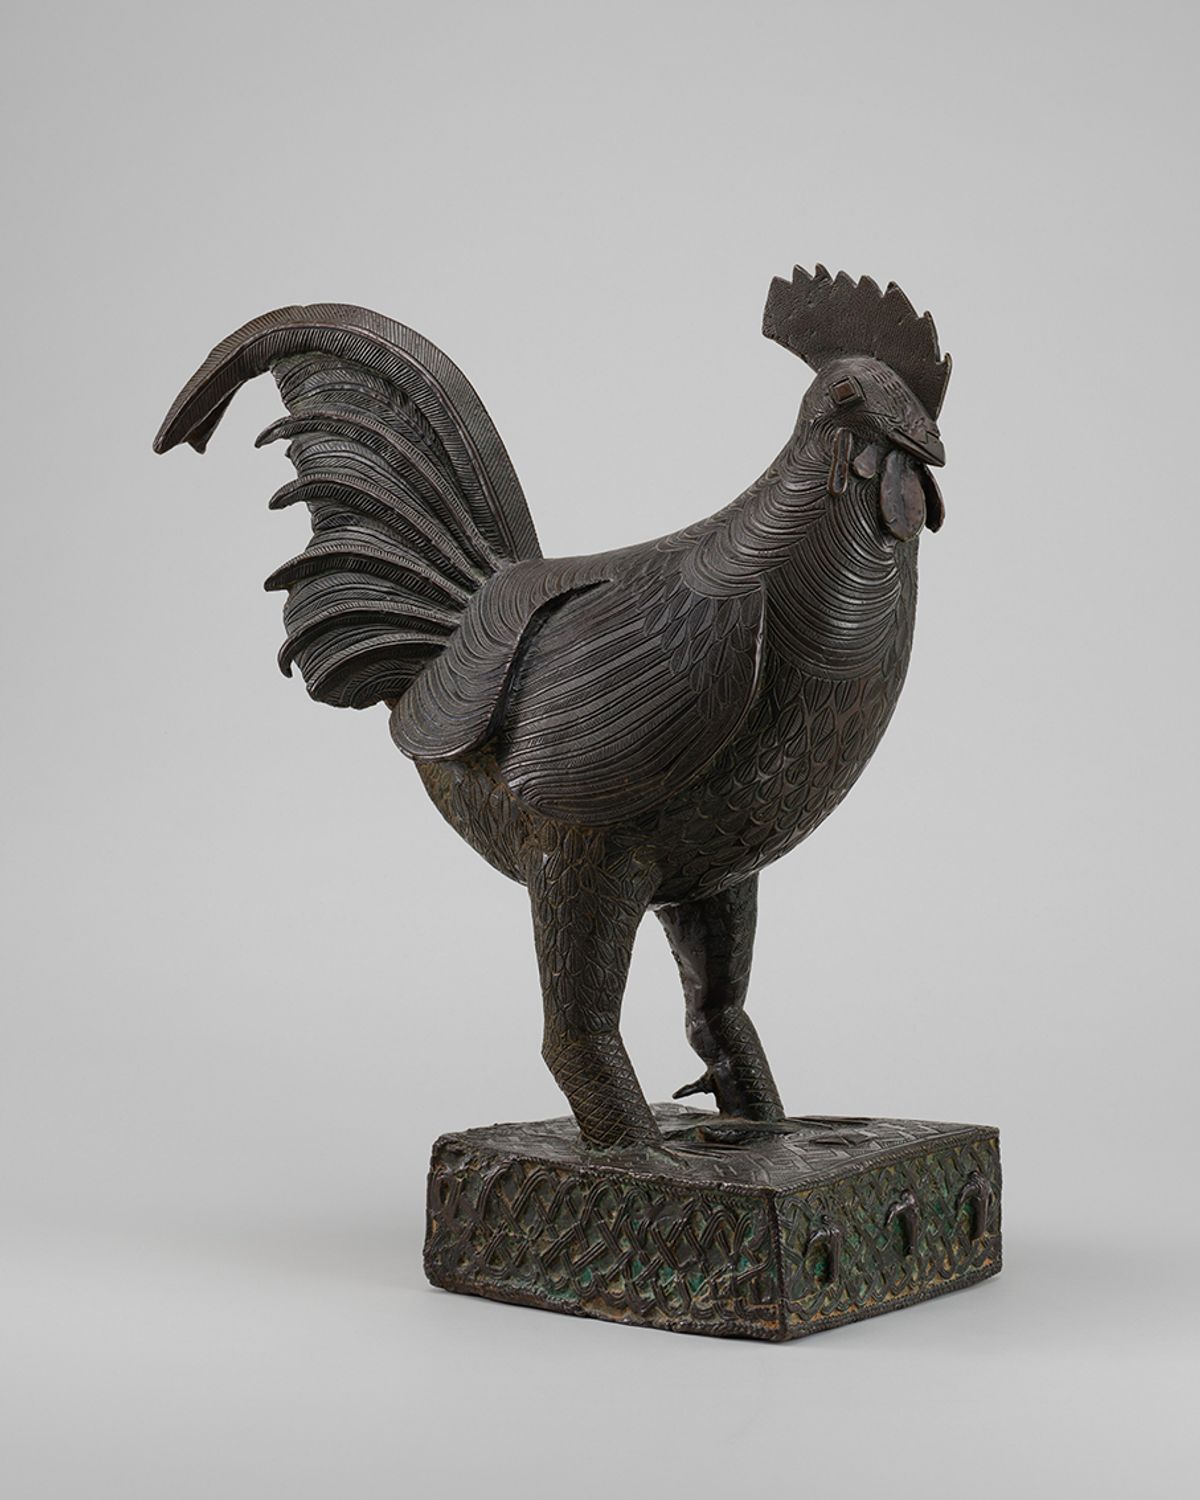 Fowl (mid 18th century) was looted from the court of Benin in 1897